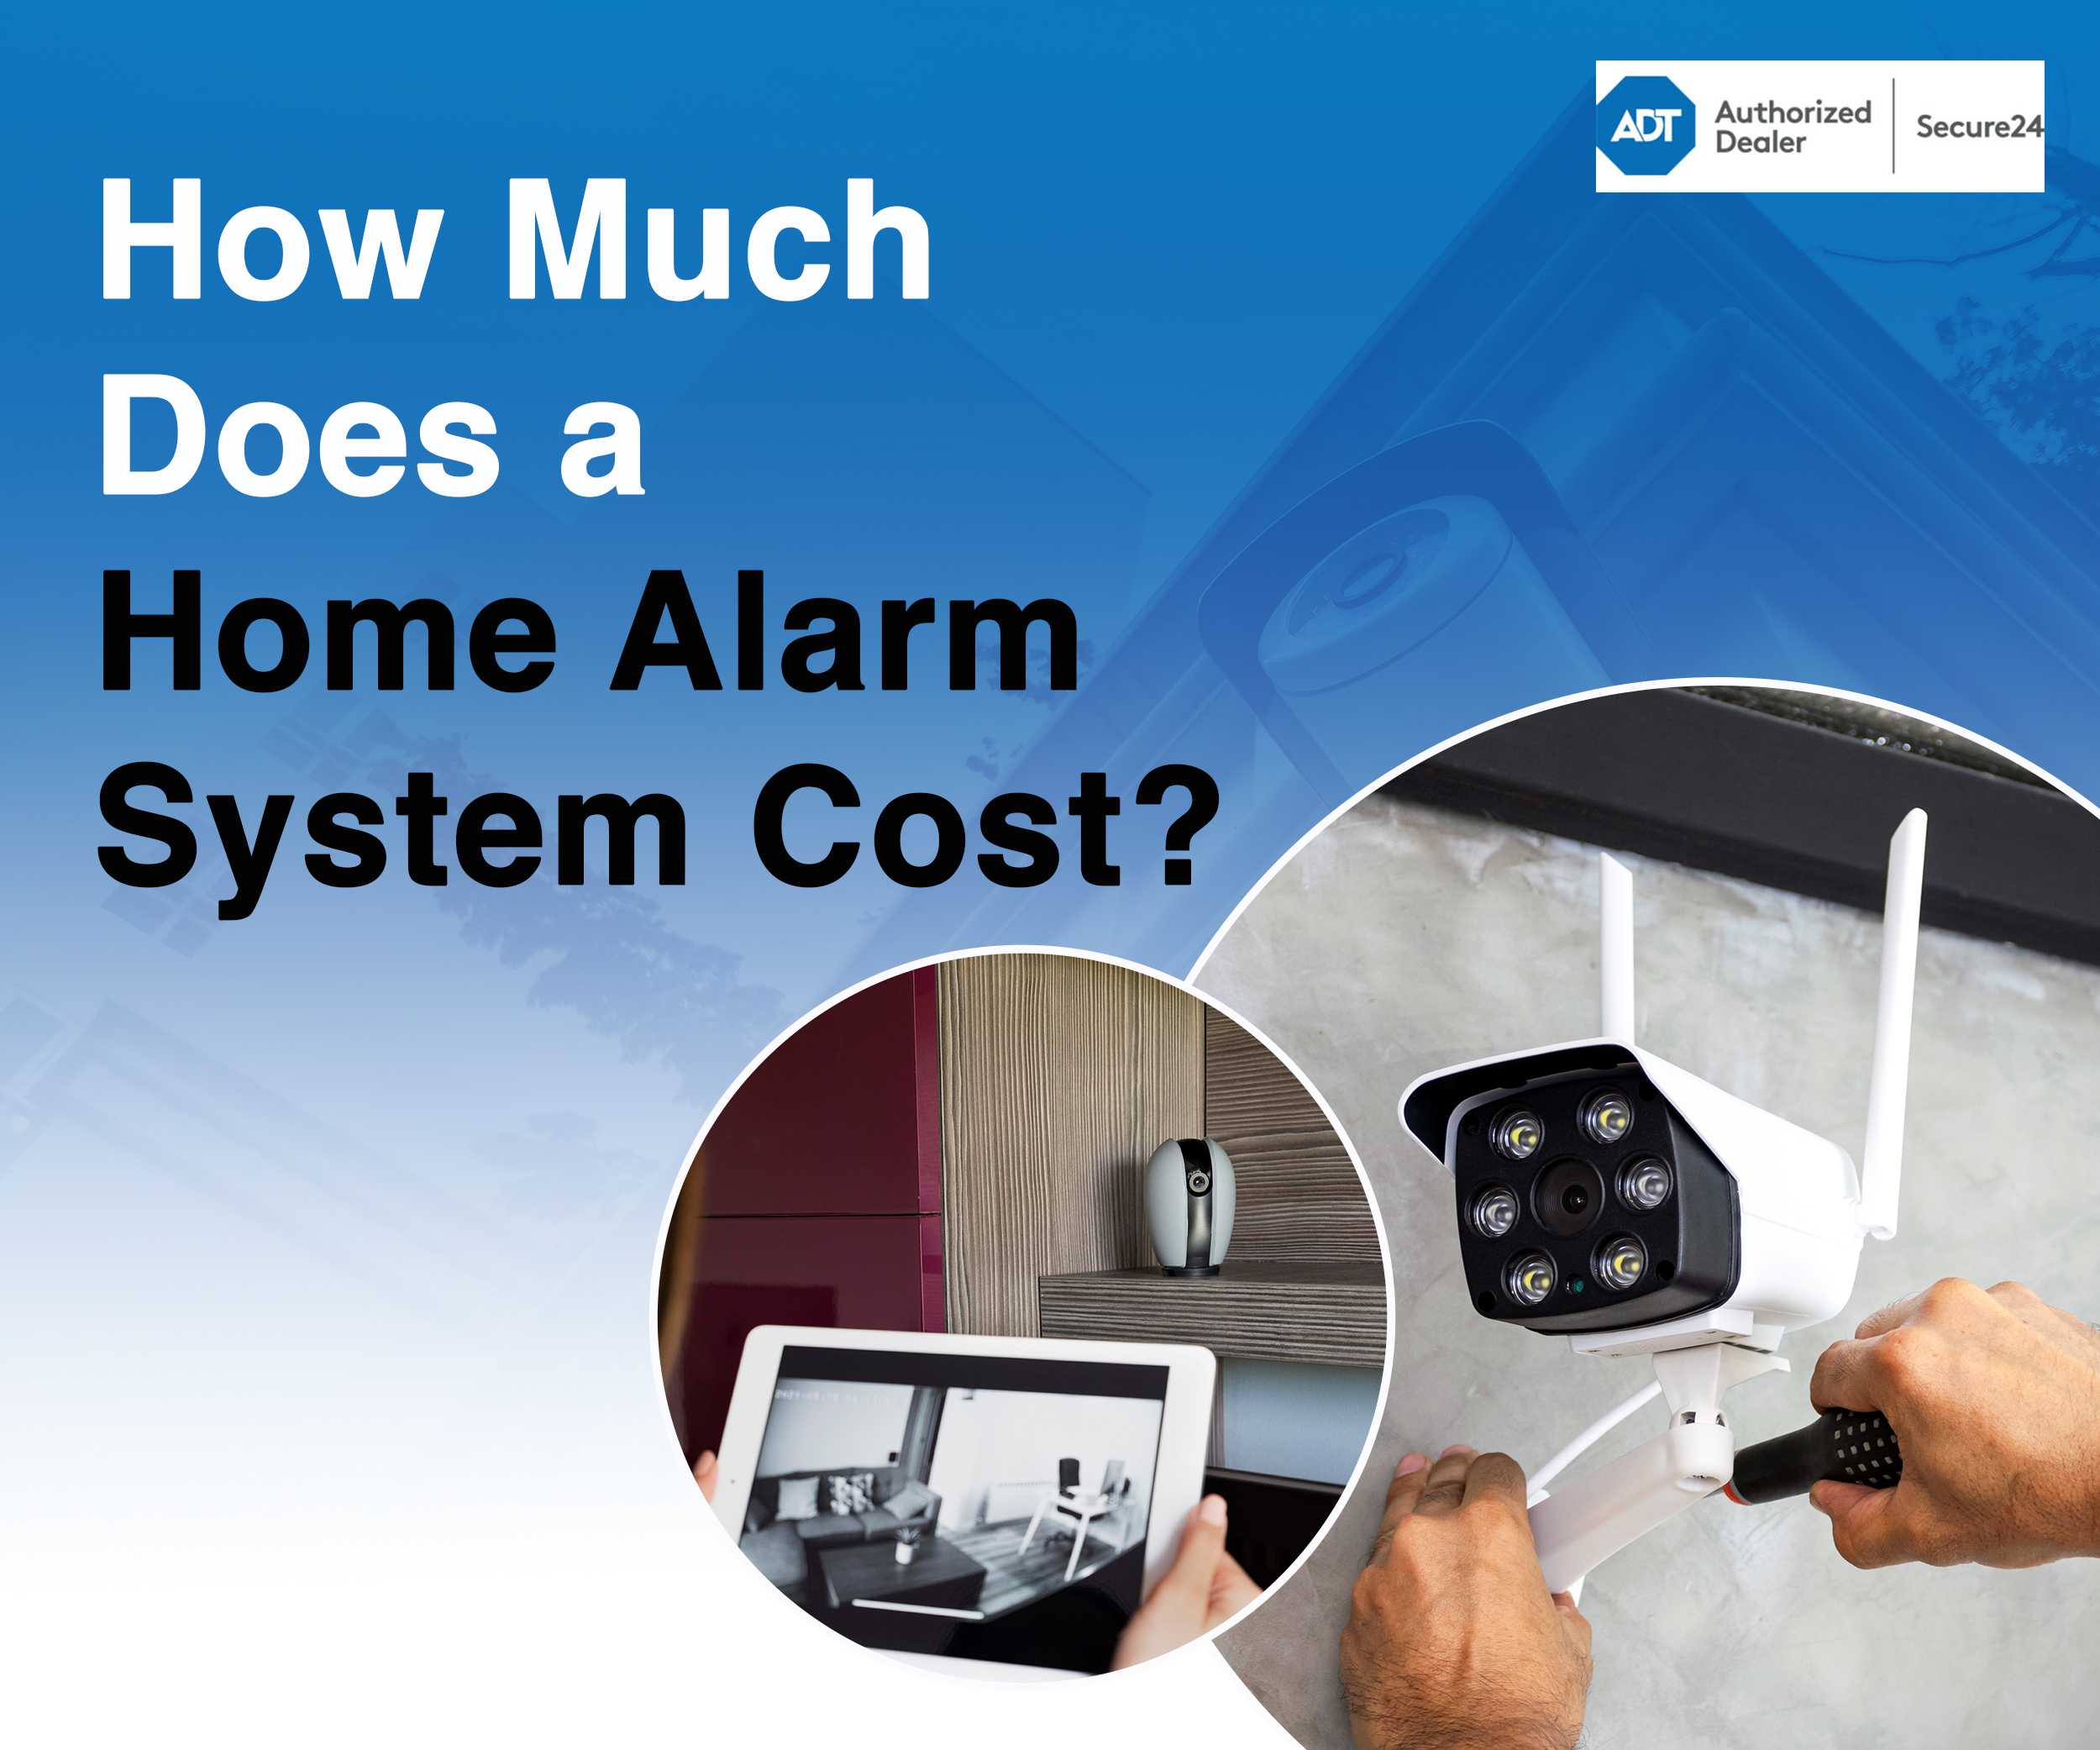 Home Alarm System Cost